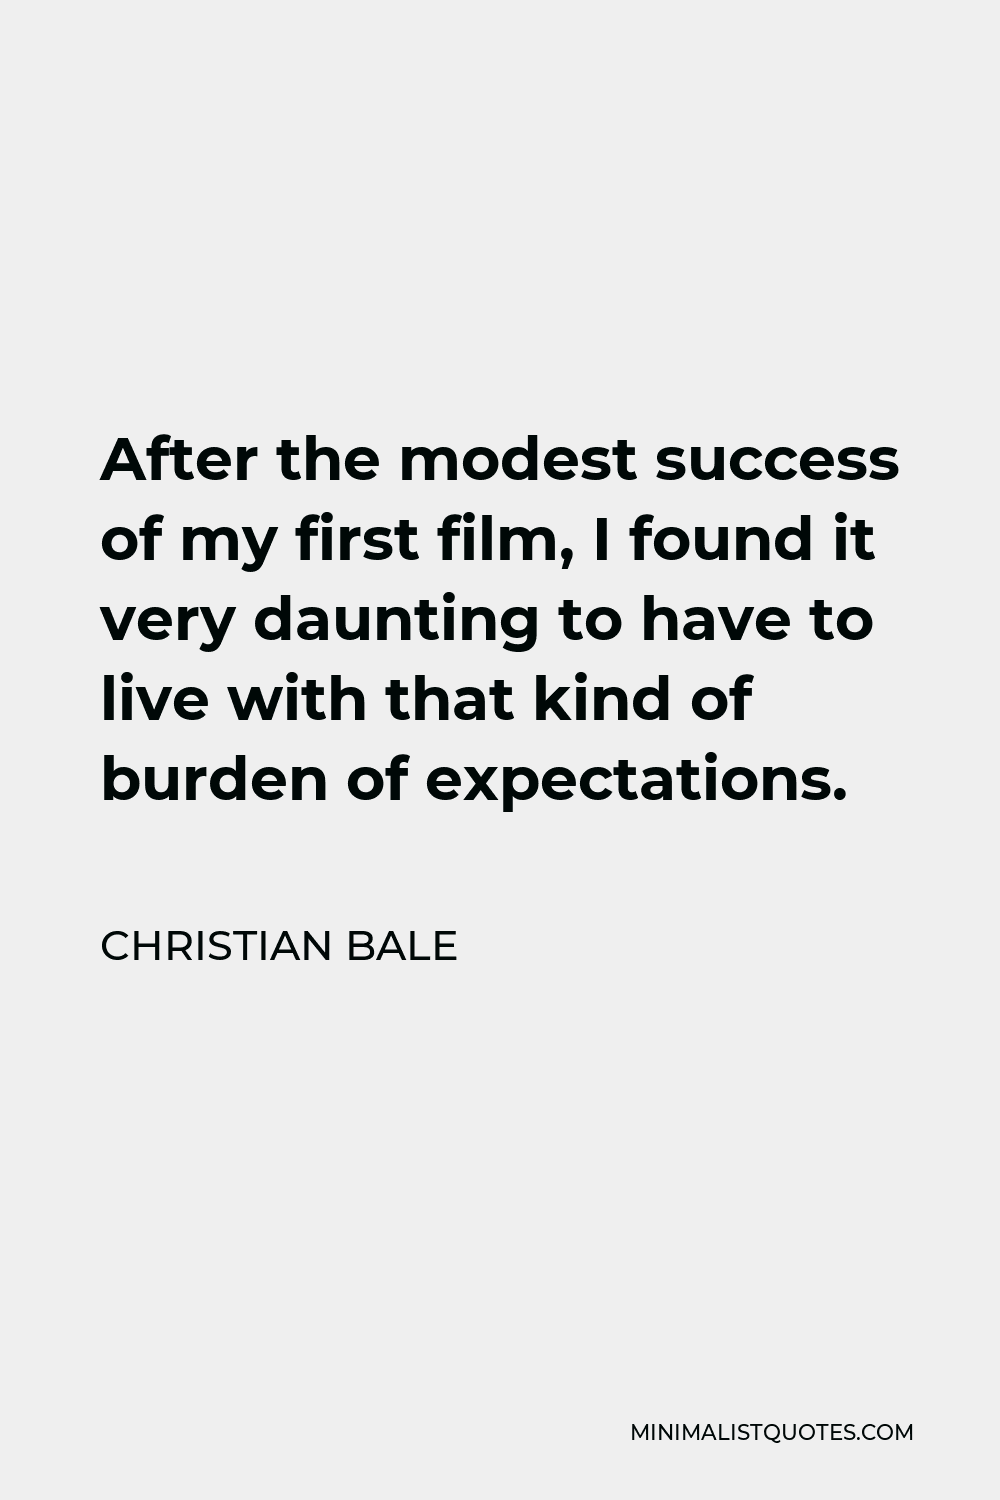 Christian Bale Quote - After the modest success of my first film, I found it very daunting to have to live with that kind of burden of expectations.